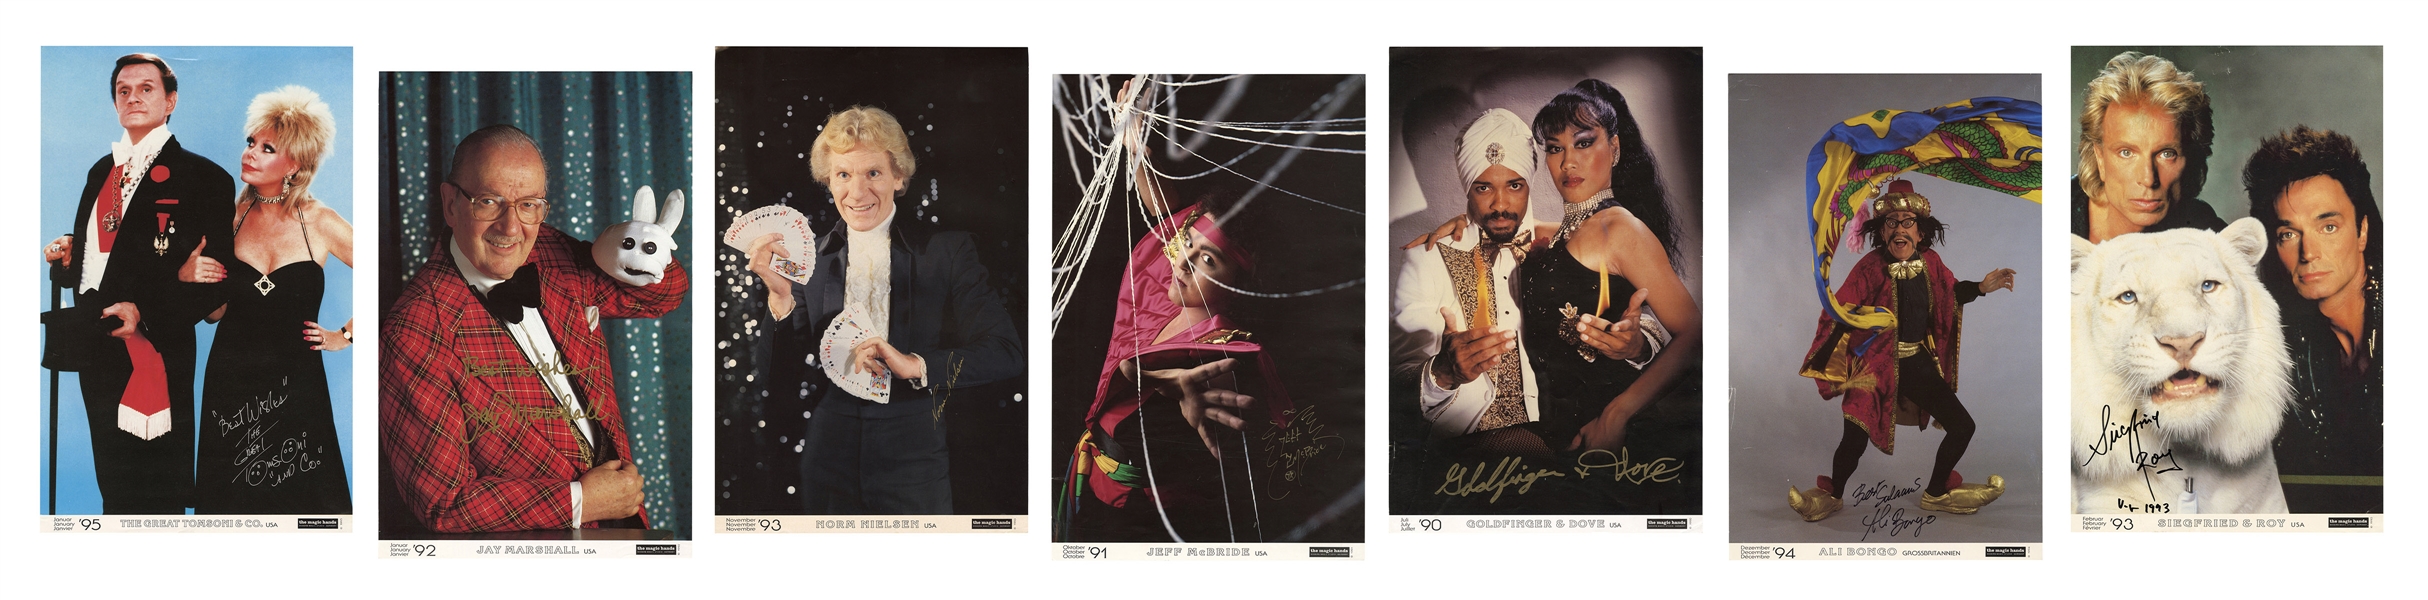  [Magic Hands] Group of 7 Signed Posters. 1992-95. Seven col...